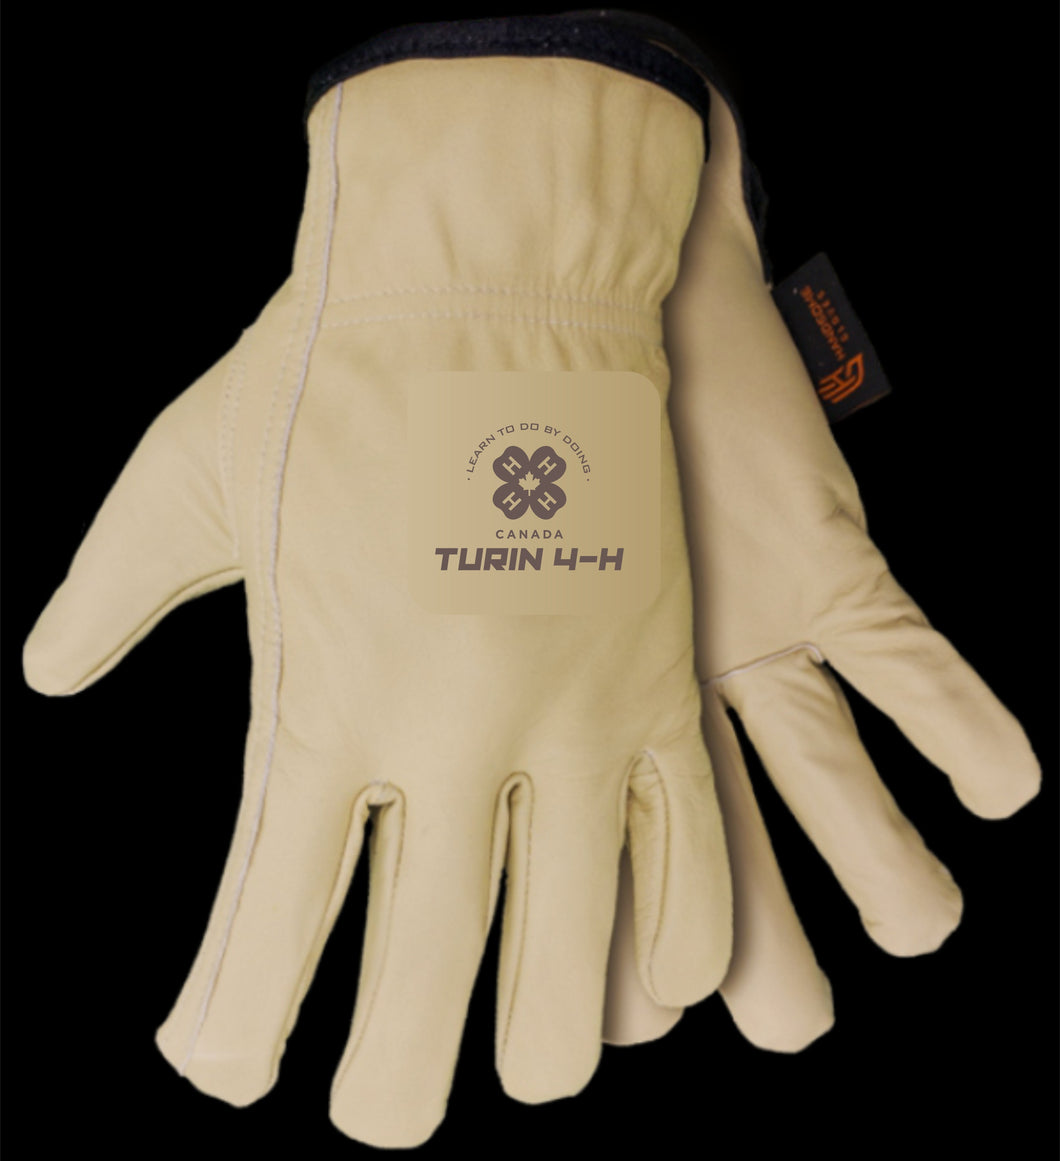 UNLINED COWHIDE GLOVES - LASERED LOGO